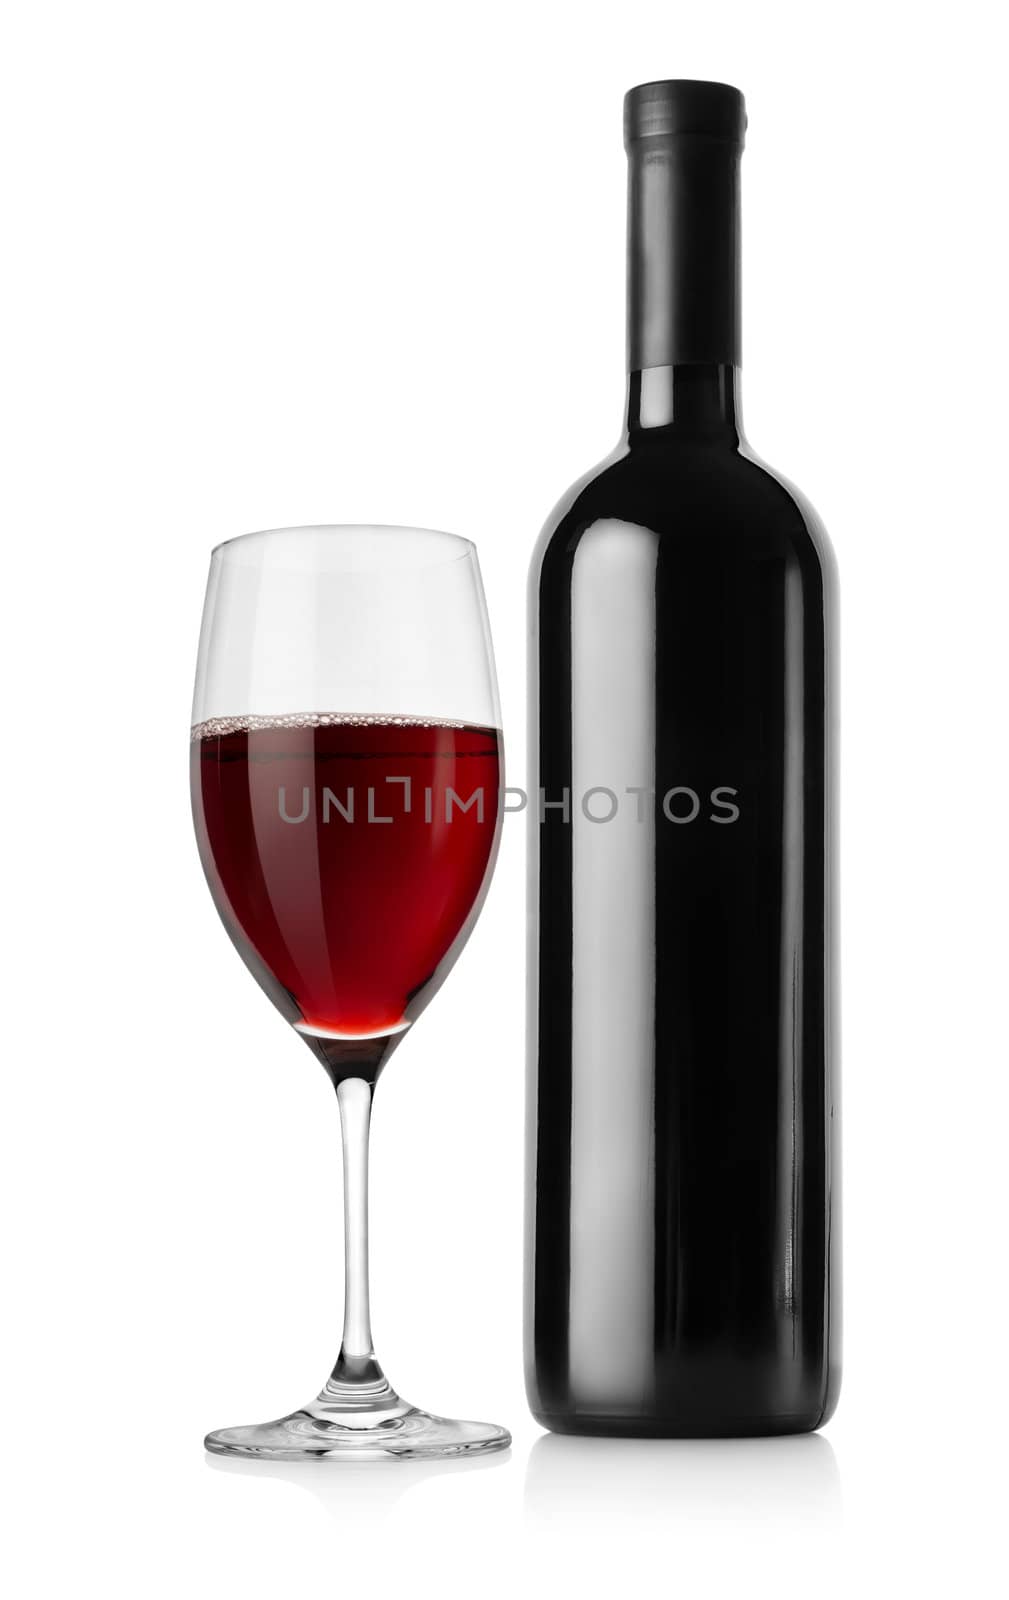 Bottle of red wine and wineglass by Givaga